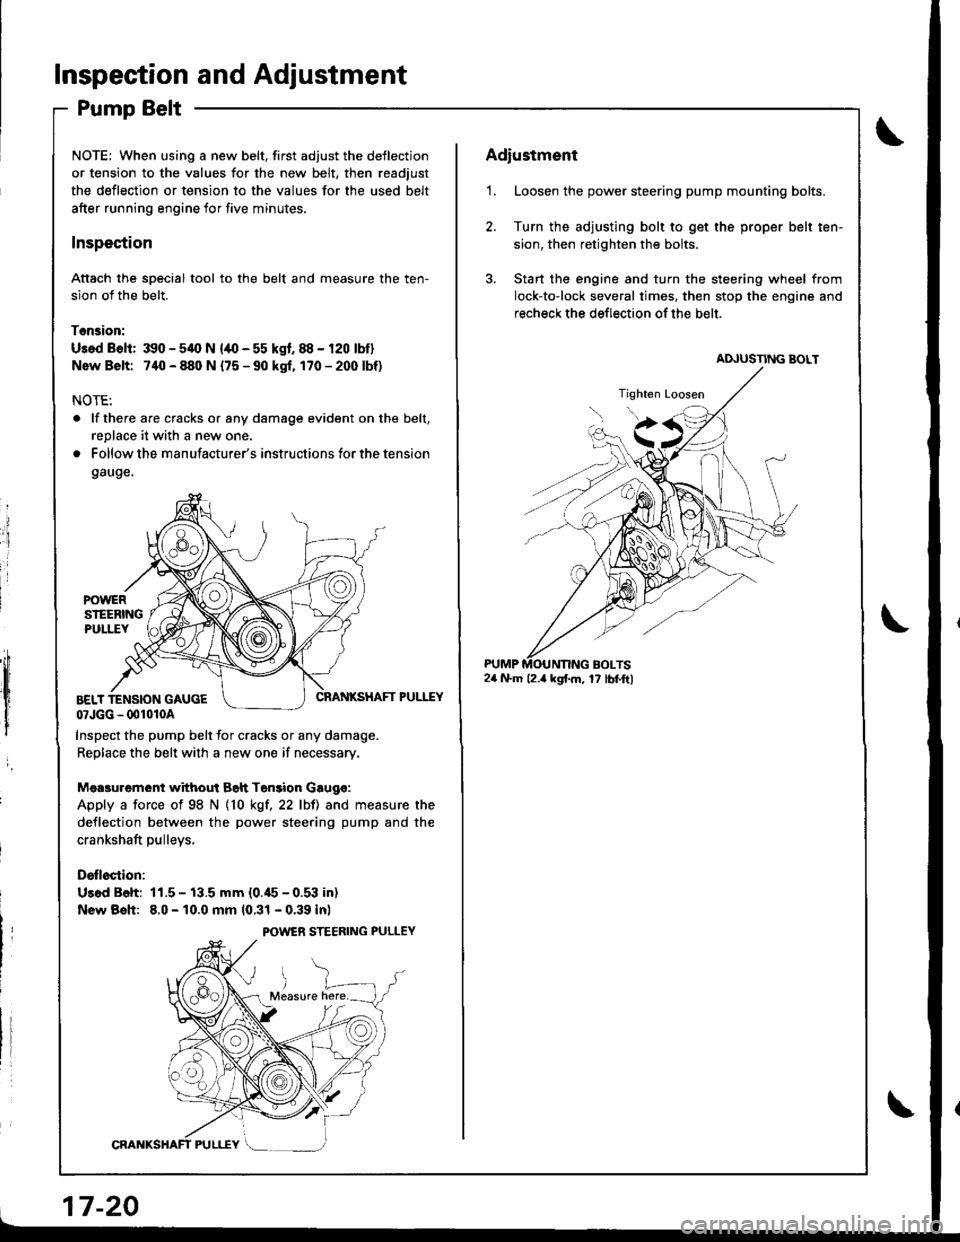 HONDA INTEGRA 1998 4.G Workshop Manual Inspection and Adjustment
Pump Belt
NOTE: When using a new belt, first adjust the deflection
or tension to the values for the new belt, then readjust
the deflection or tension to the values for the us